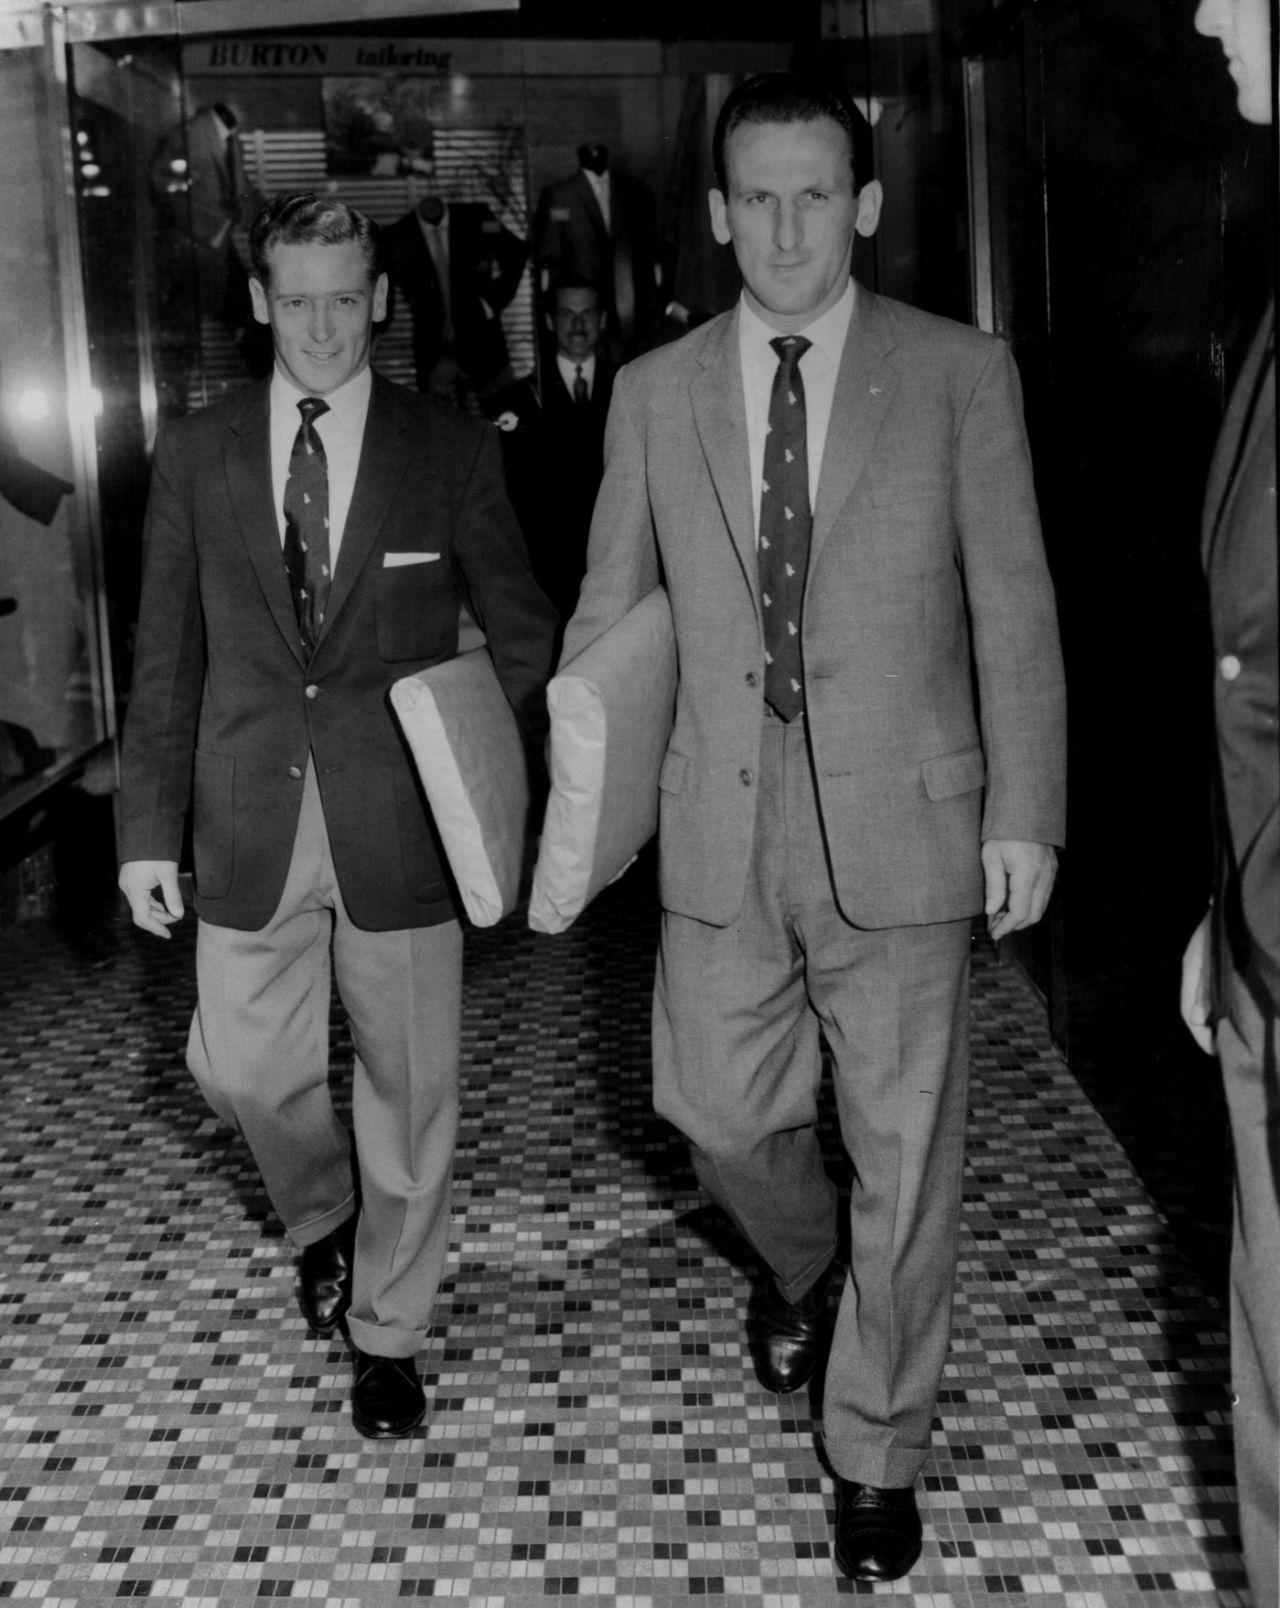 Jackie McGlew and Sid O'Linn walk out of a tailoring store in their new suits, London, September 10, 1960